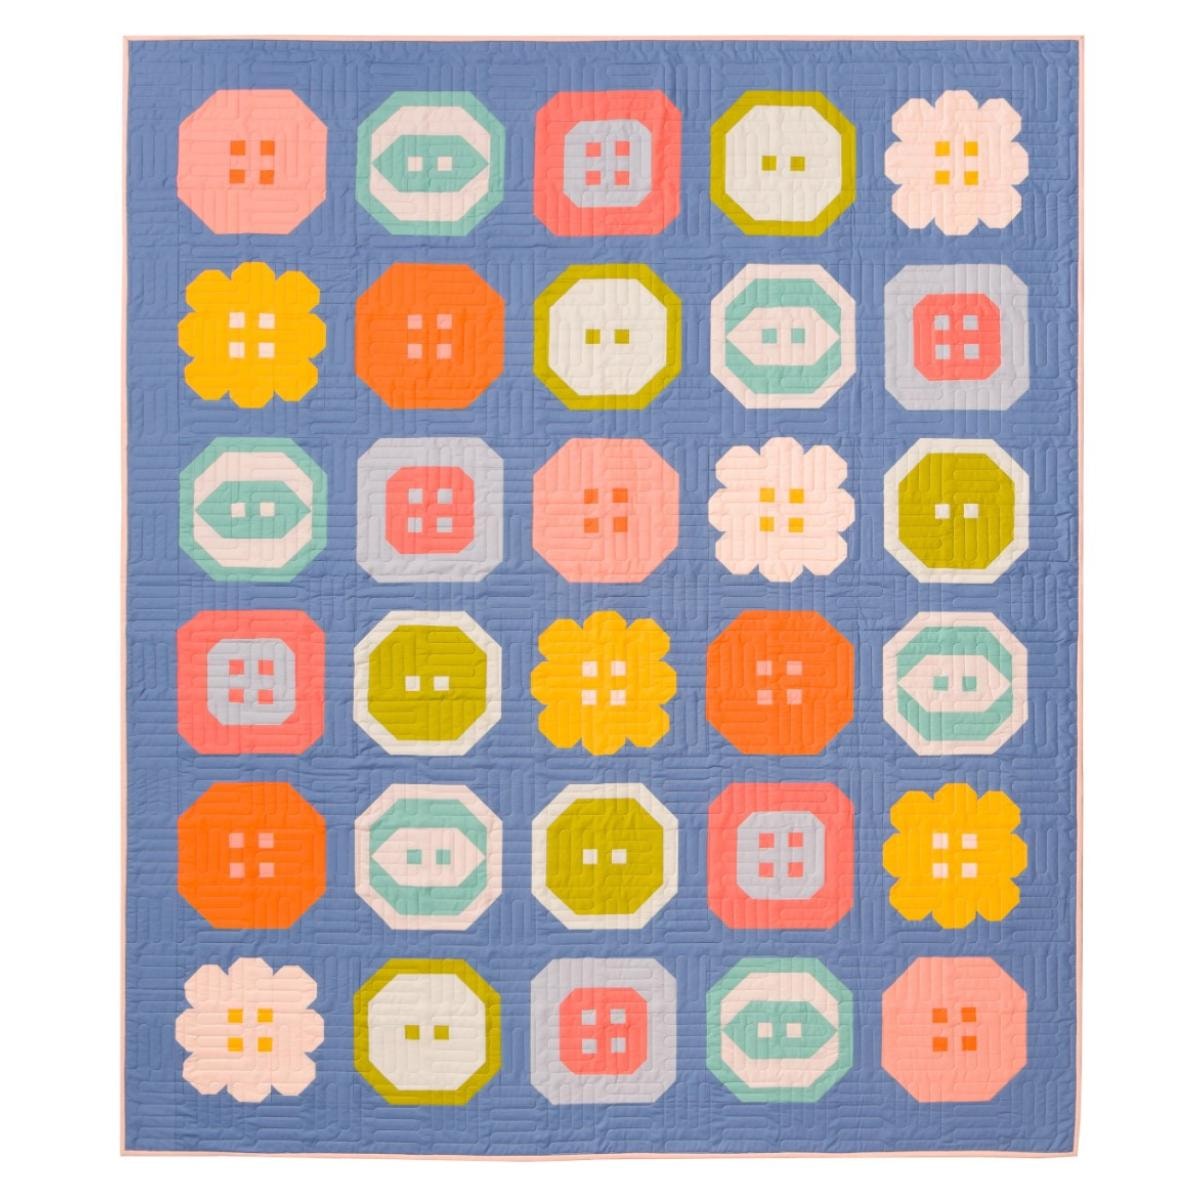 Buttoned Up Quilt Kit - INCLUDES PATTERN